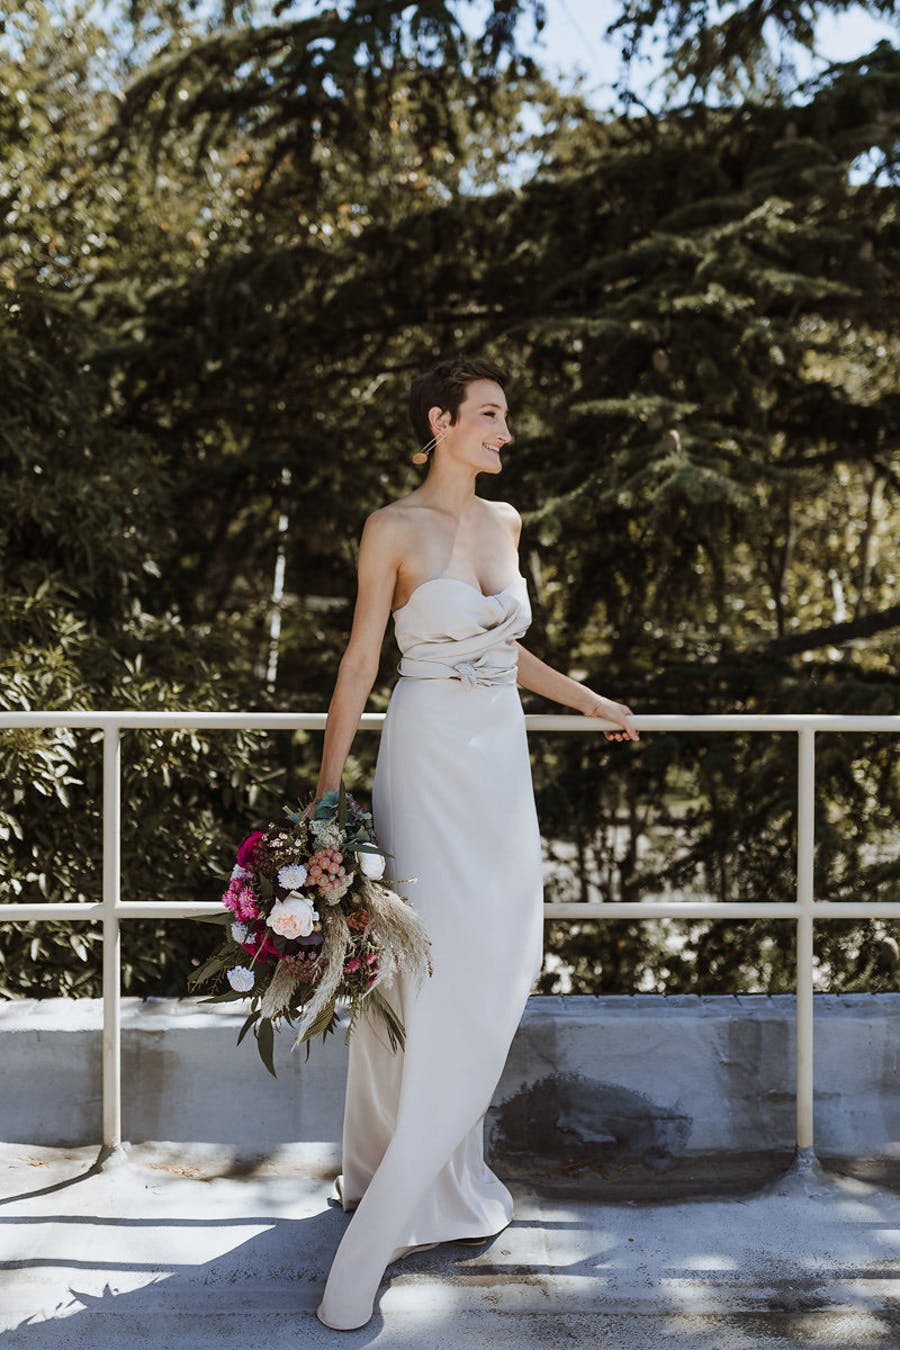 One of the brides was wearing a strapless sheath wedding dress with a draped bodice and statement earrings